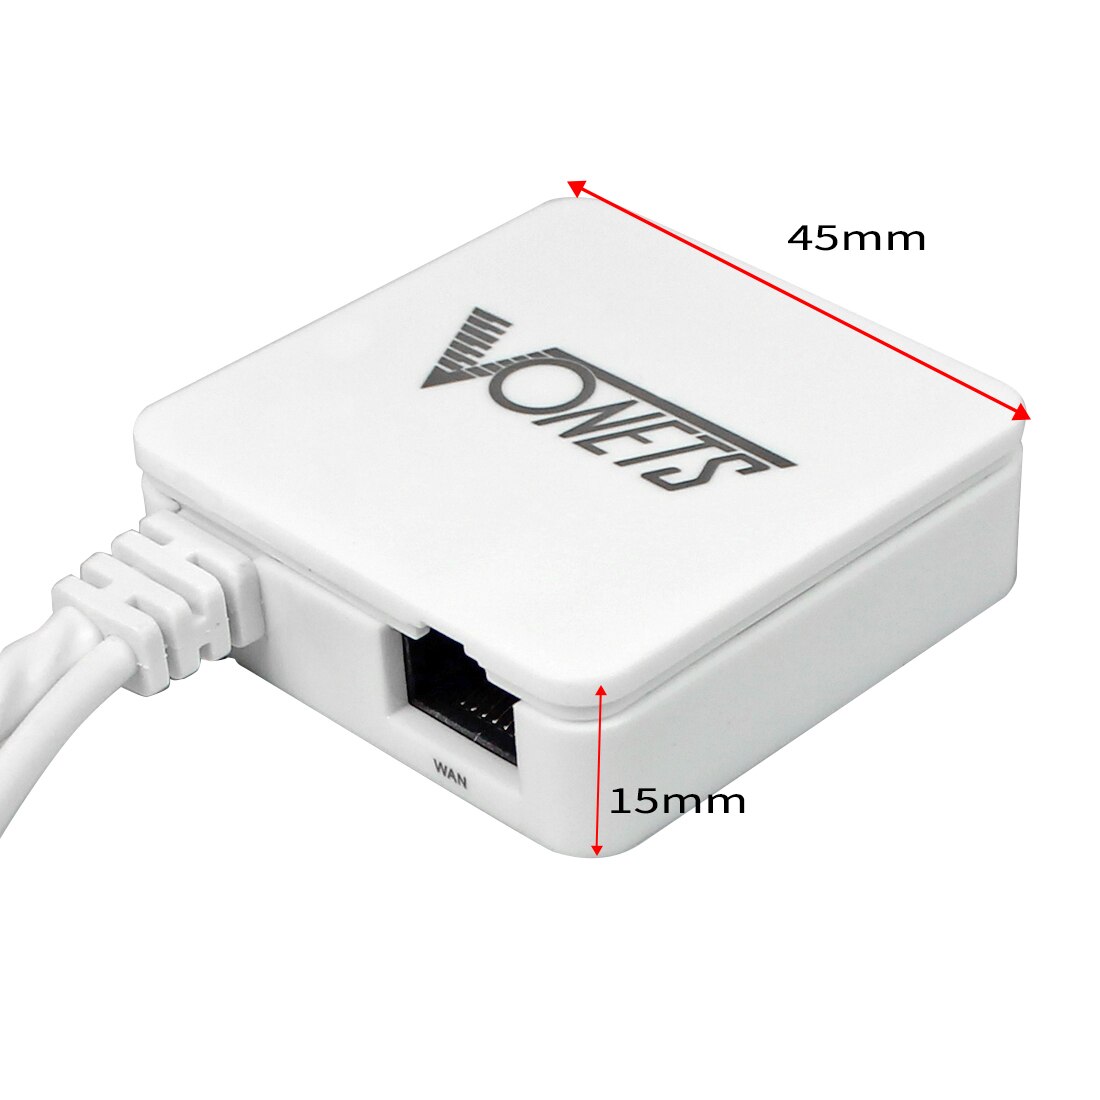 Vonets VAR11N-300 MINI WiFi Wireless Networking Router &amp; Bridge Router Wifi Repeater 300Mbps Wifi Signal Stable